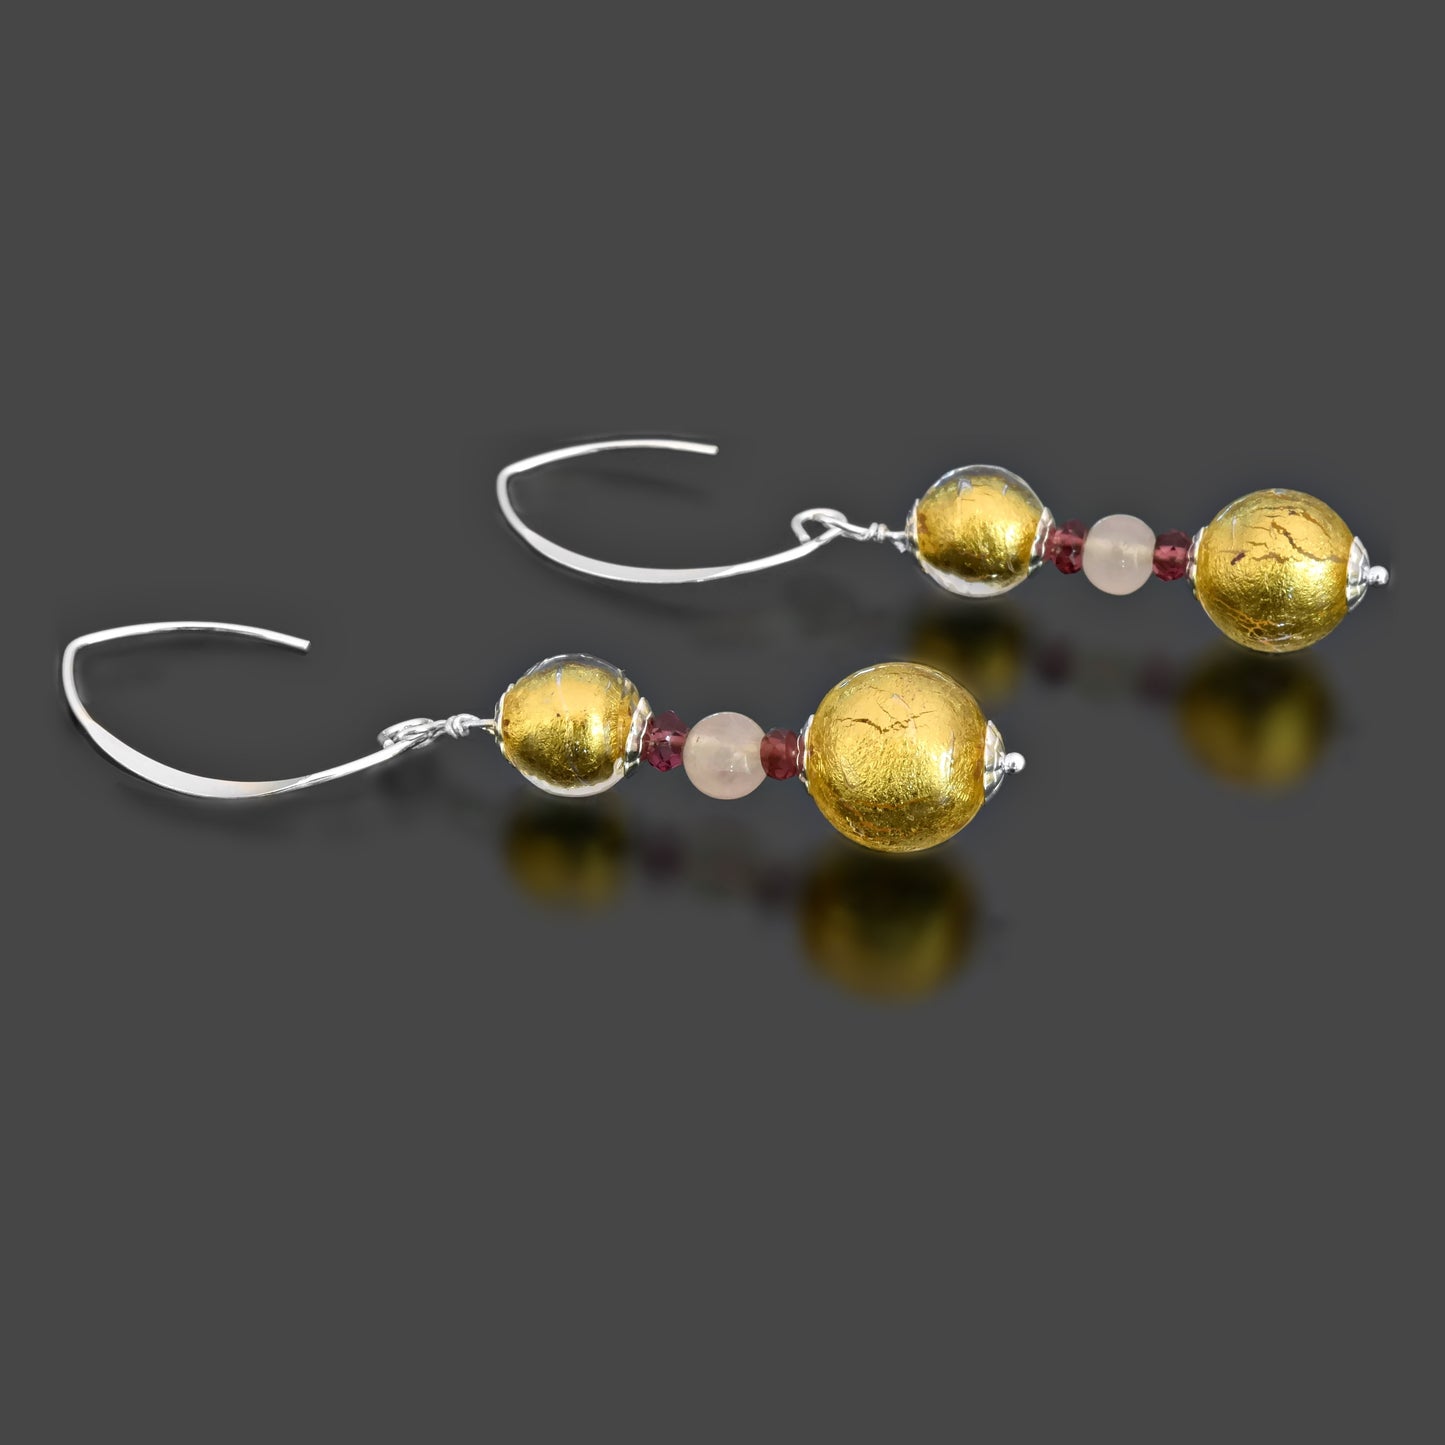 Round Gold Murano Glass Earrings with Rose Quartz and Garnet Sterling Silver 